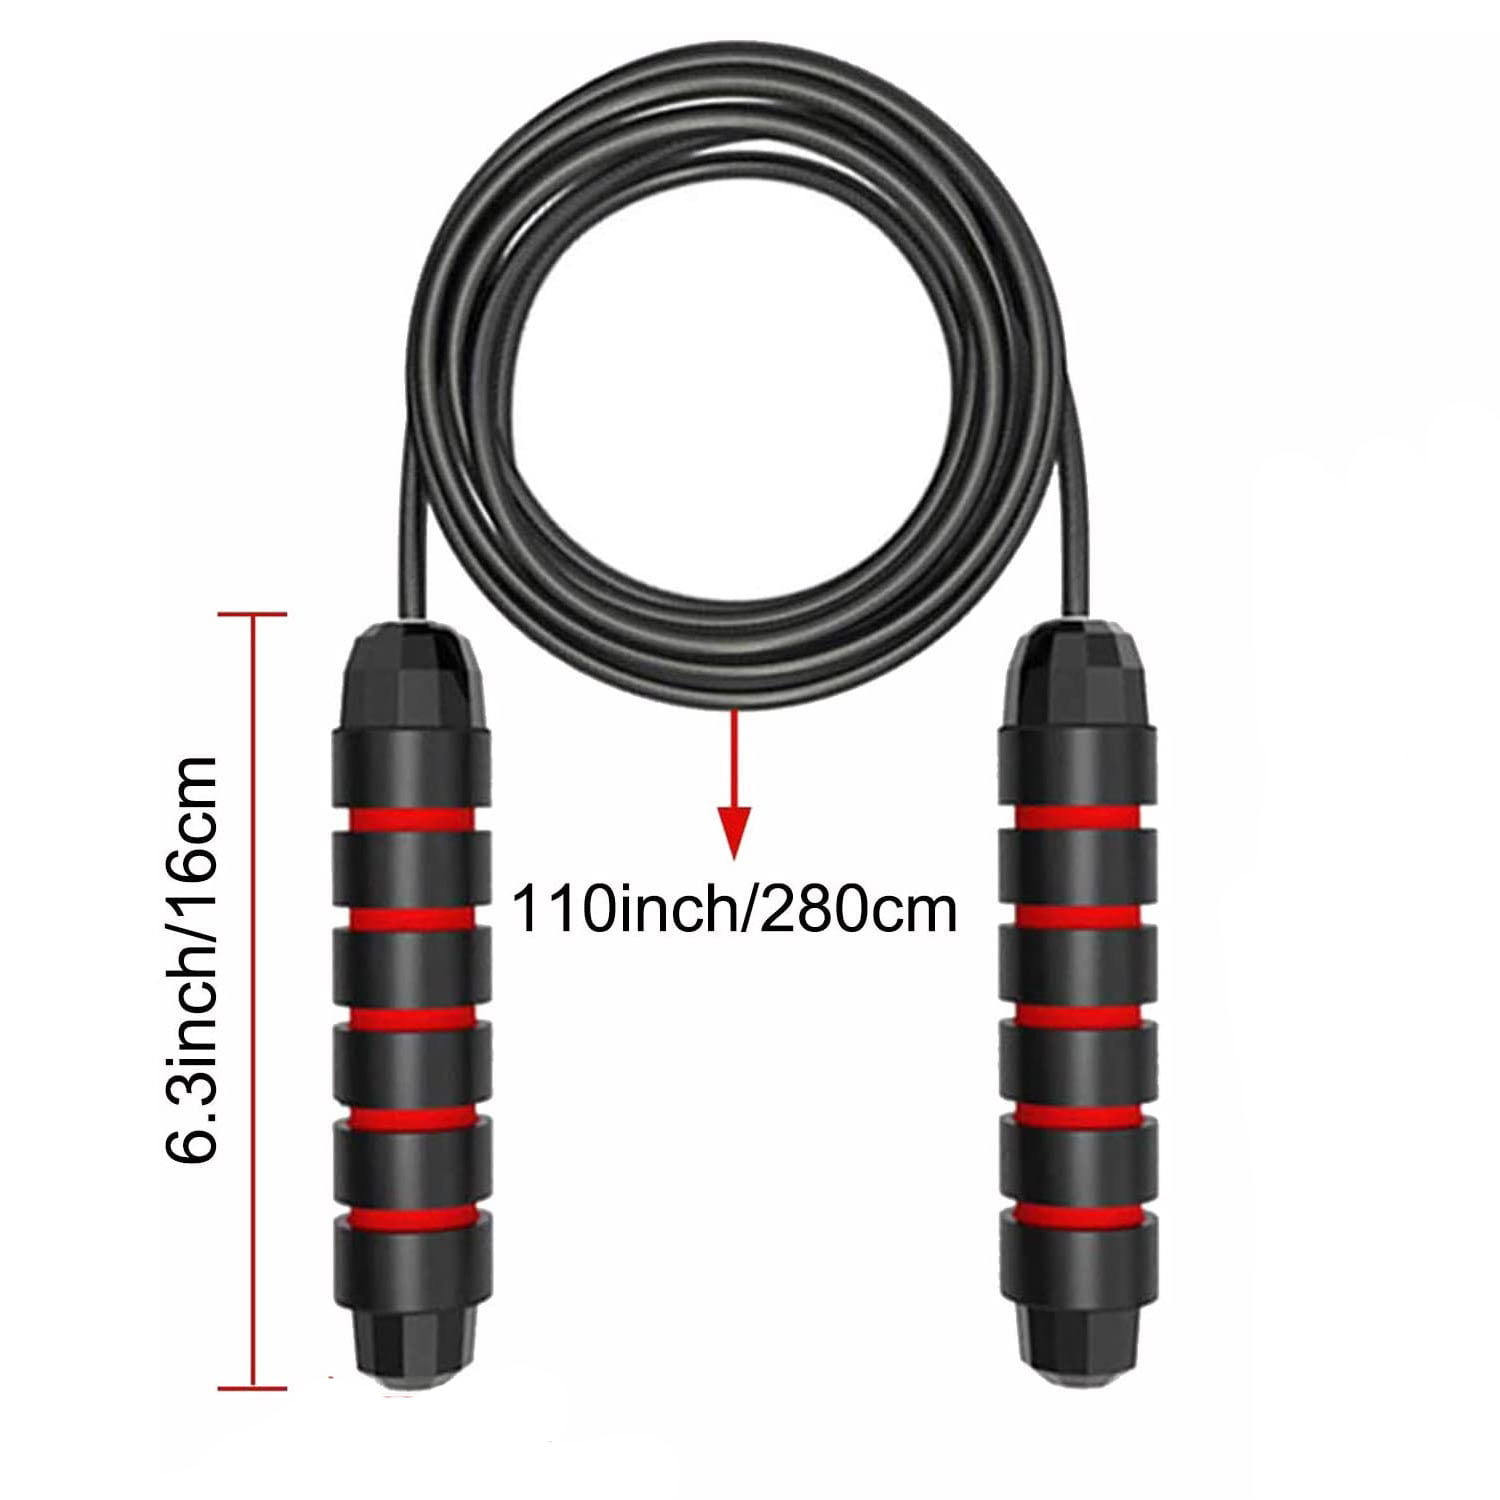 Tangle-Free with Ball Bearing Cable Speed Rope Skipping Rope for Exercise Fitness，Adjustable Jumping Ropes with 6 Memory Foam Handles Rapid Speed Jump Rope Cable for Men,2 Pack ahere Jump Rope